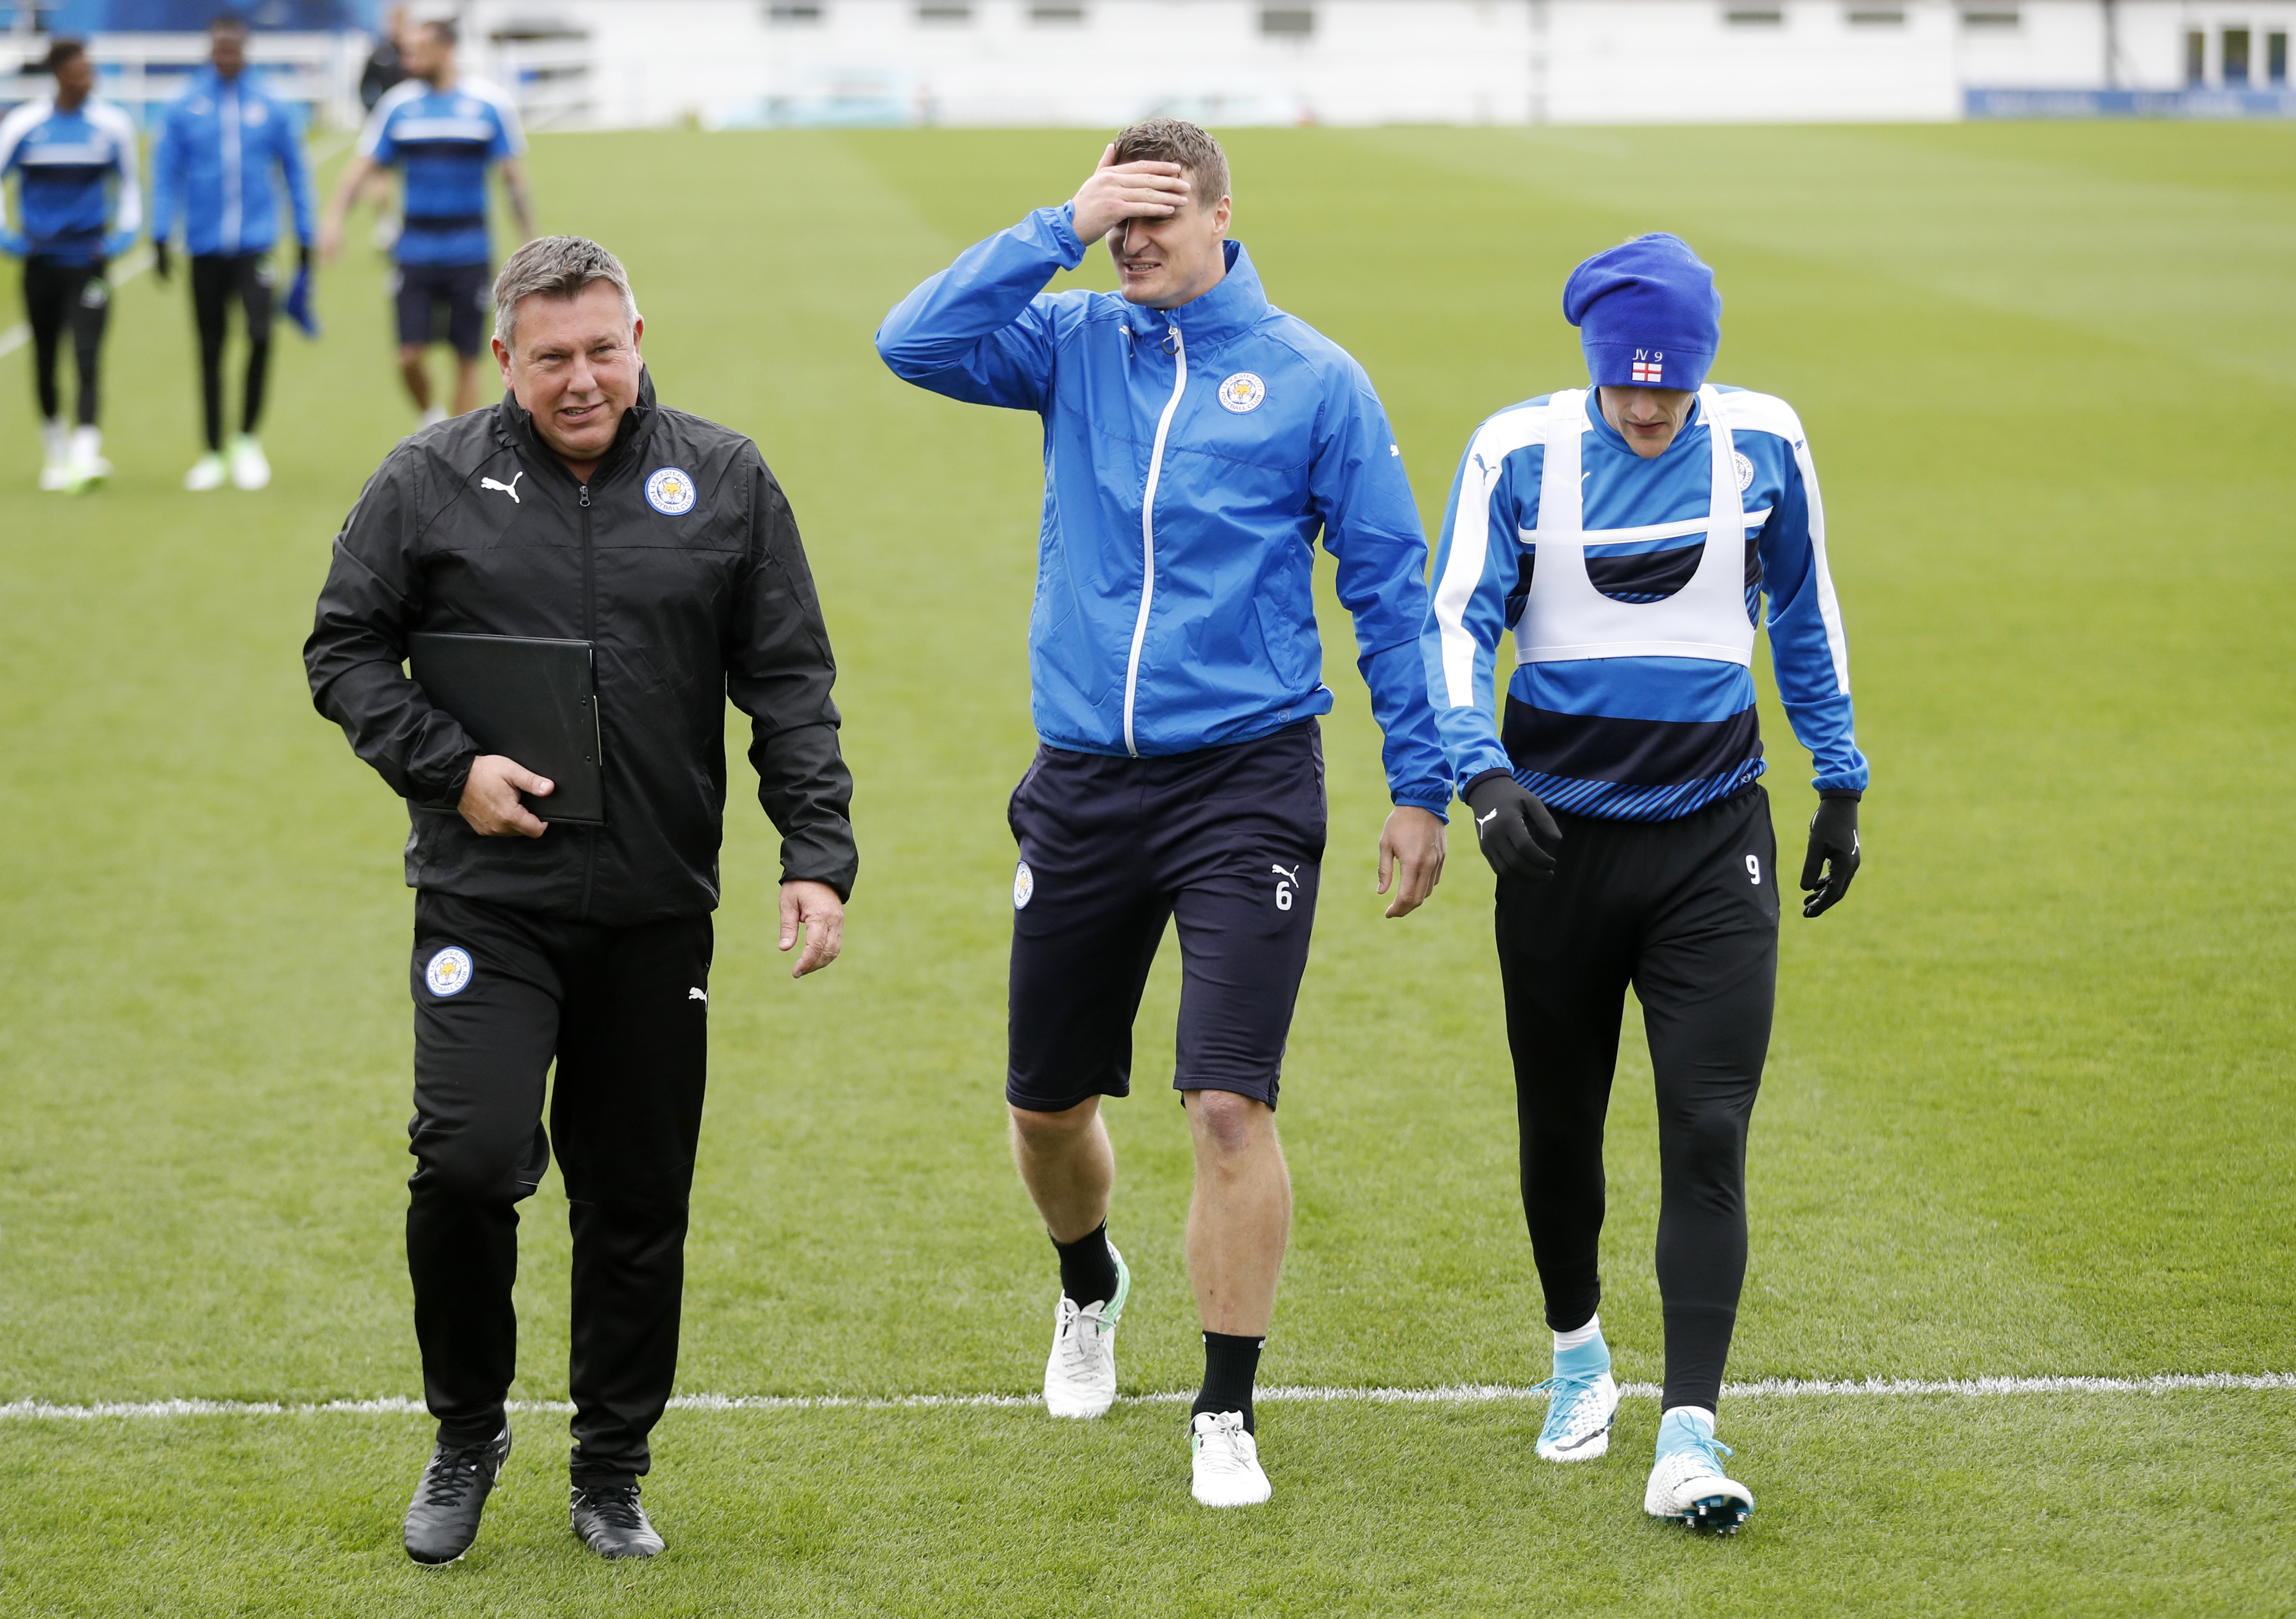 Football: Leicester manager unsure of points target for survival